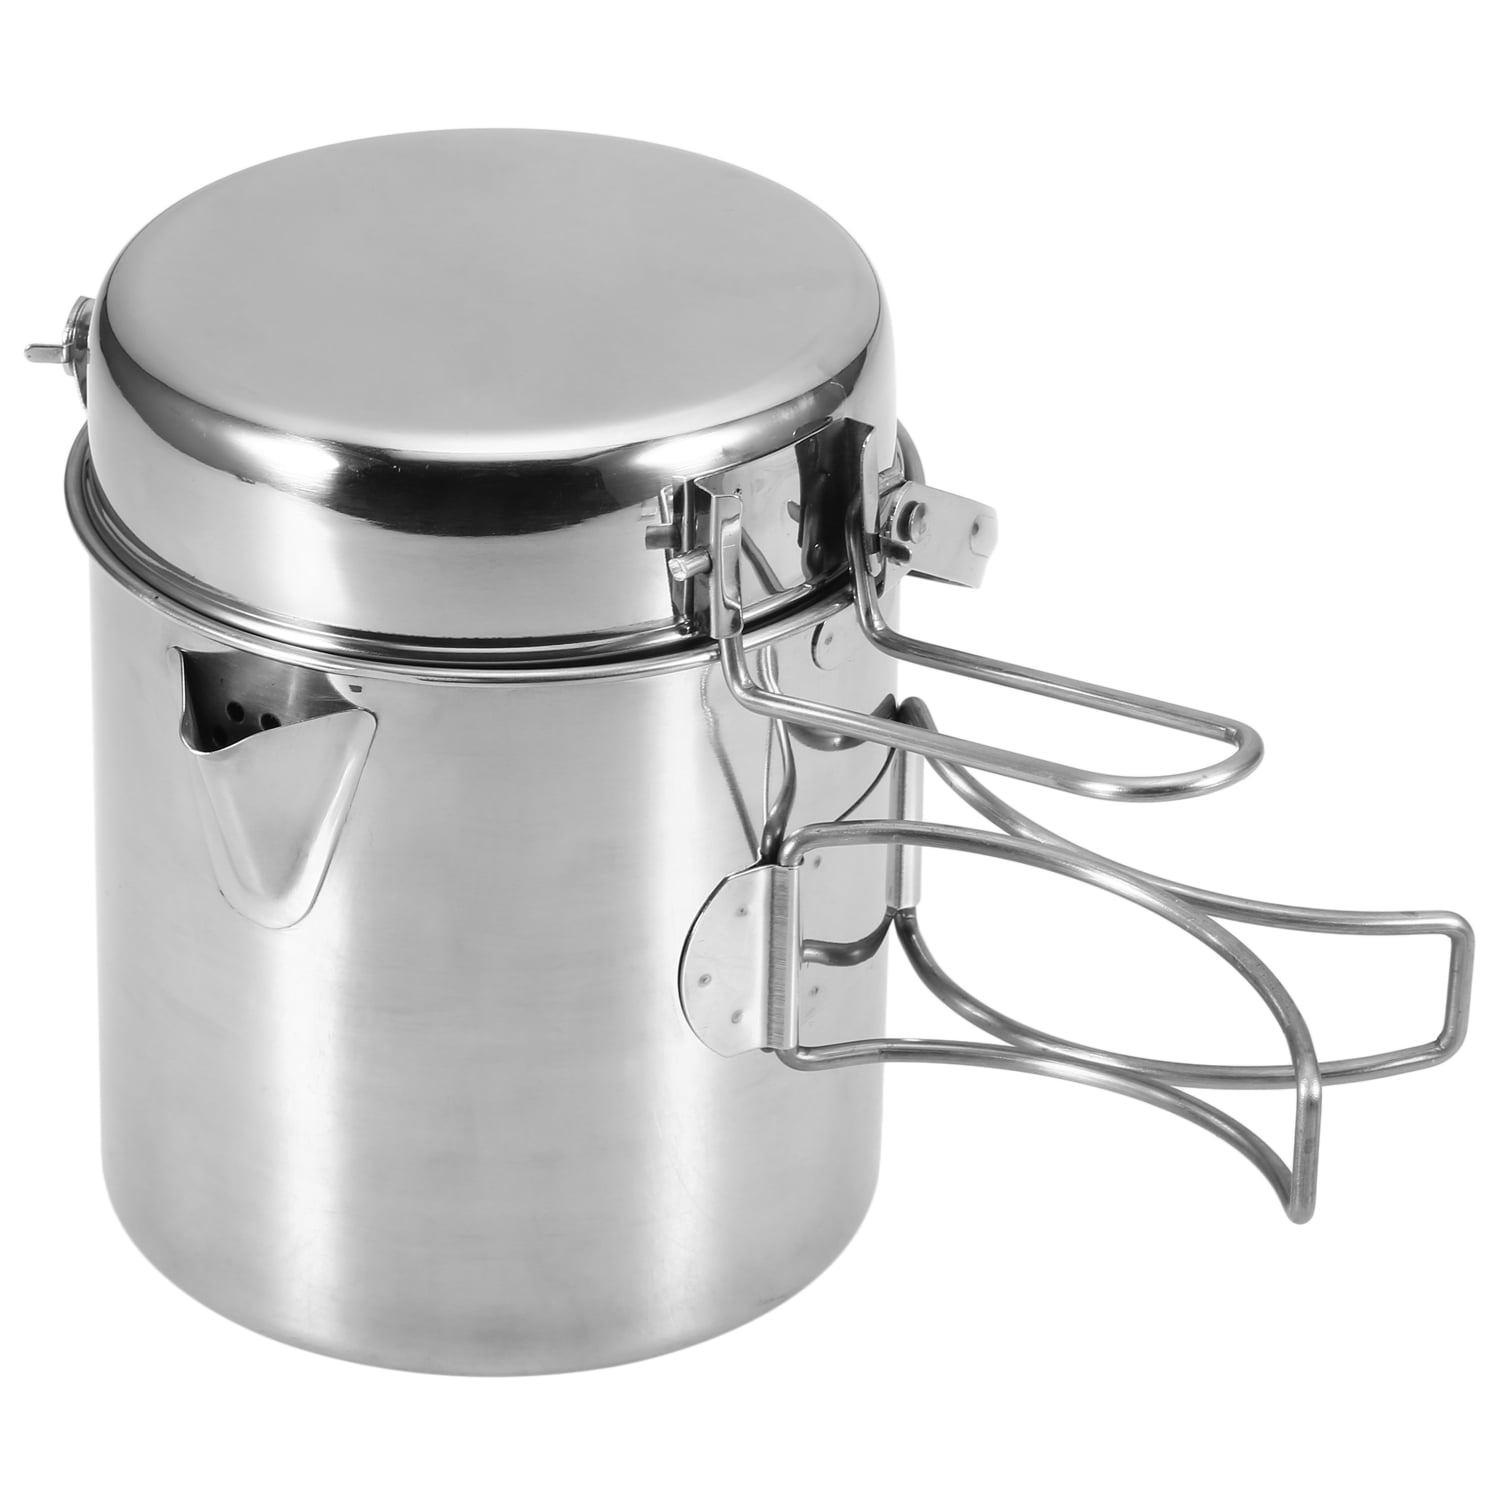 1L/115g Titanium Outdoor Camping Cooking Survival Pot Water Kettle Teapot Coffee